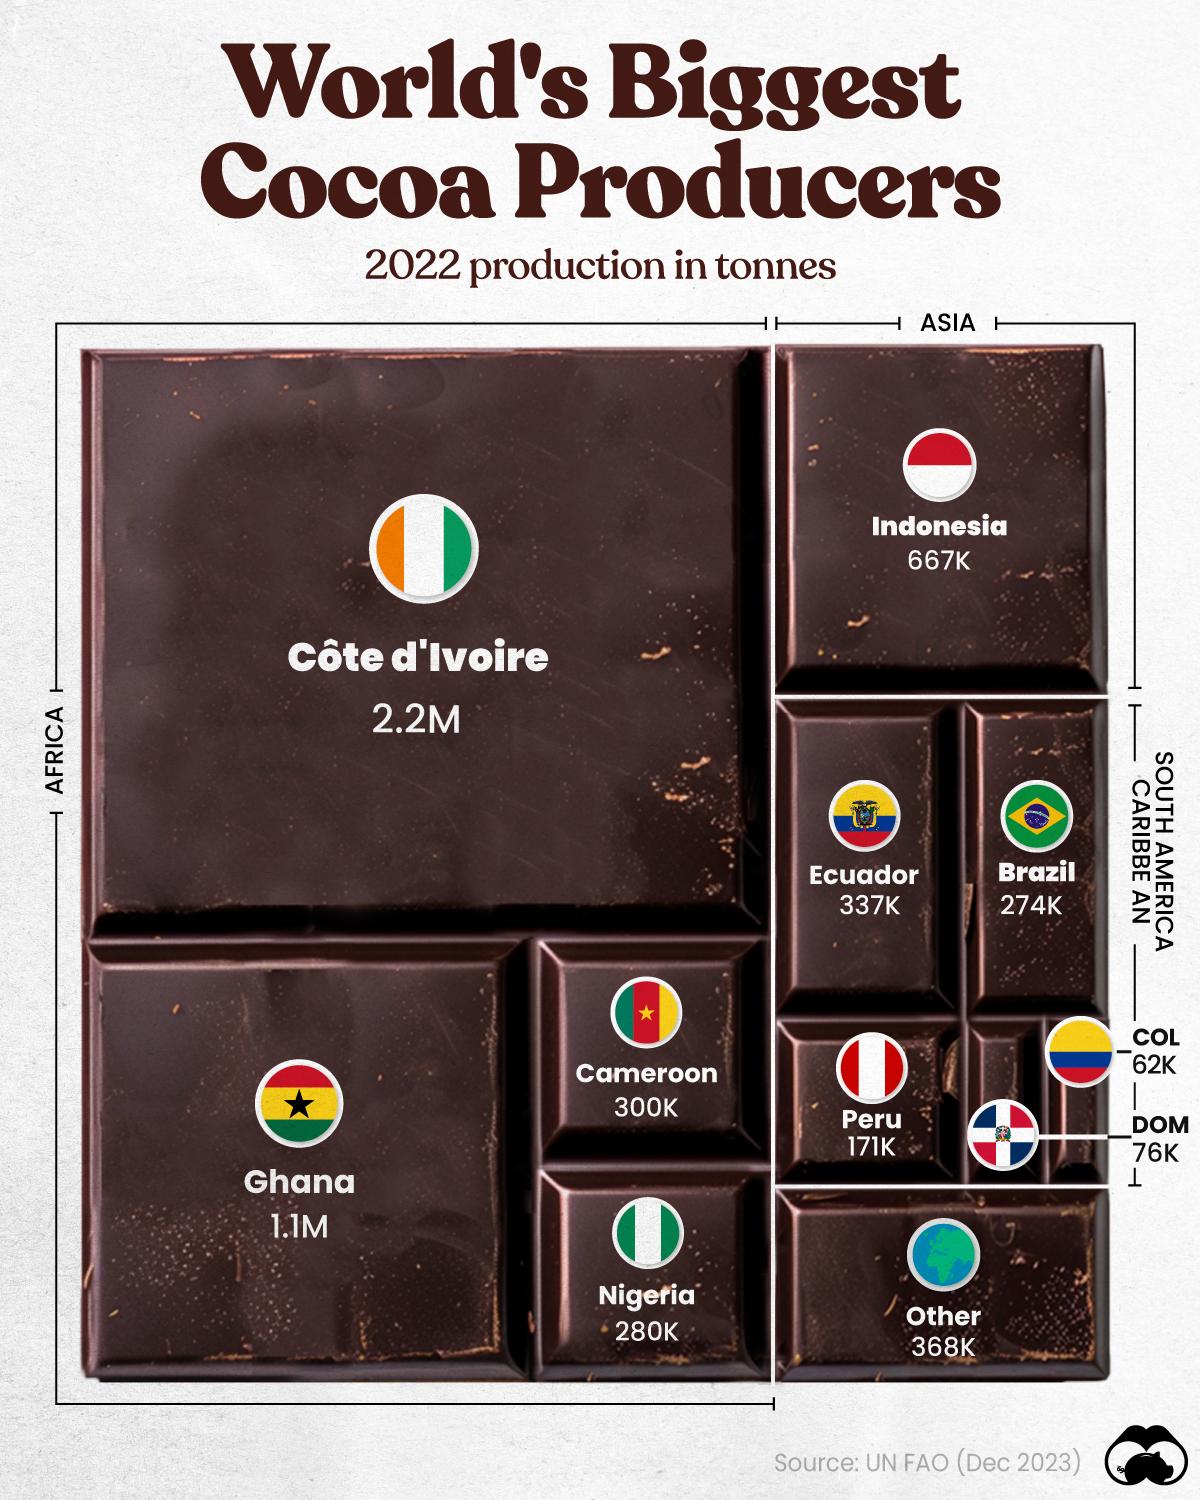 Just Two Countries Produce 57% of the World’s Cocoa 🍫